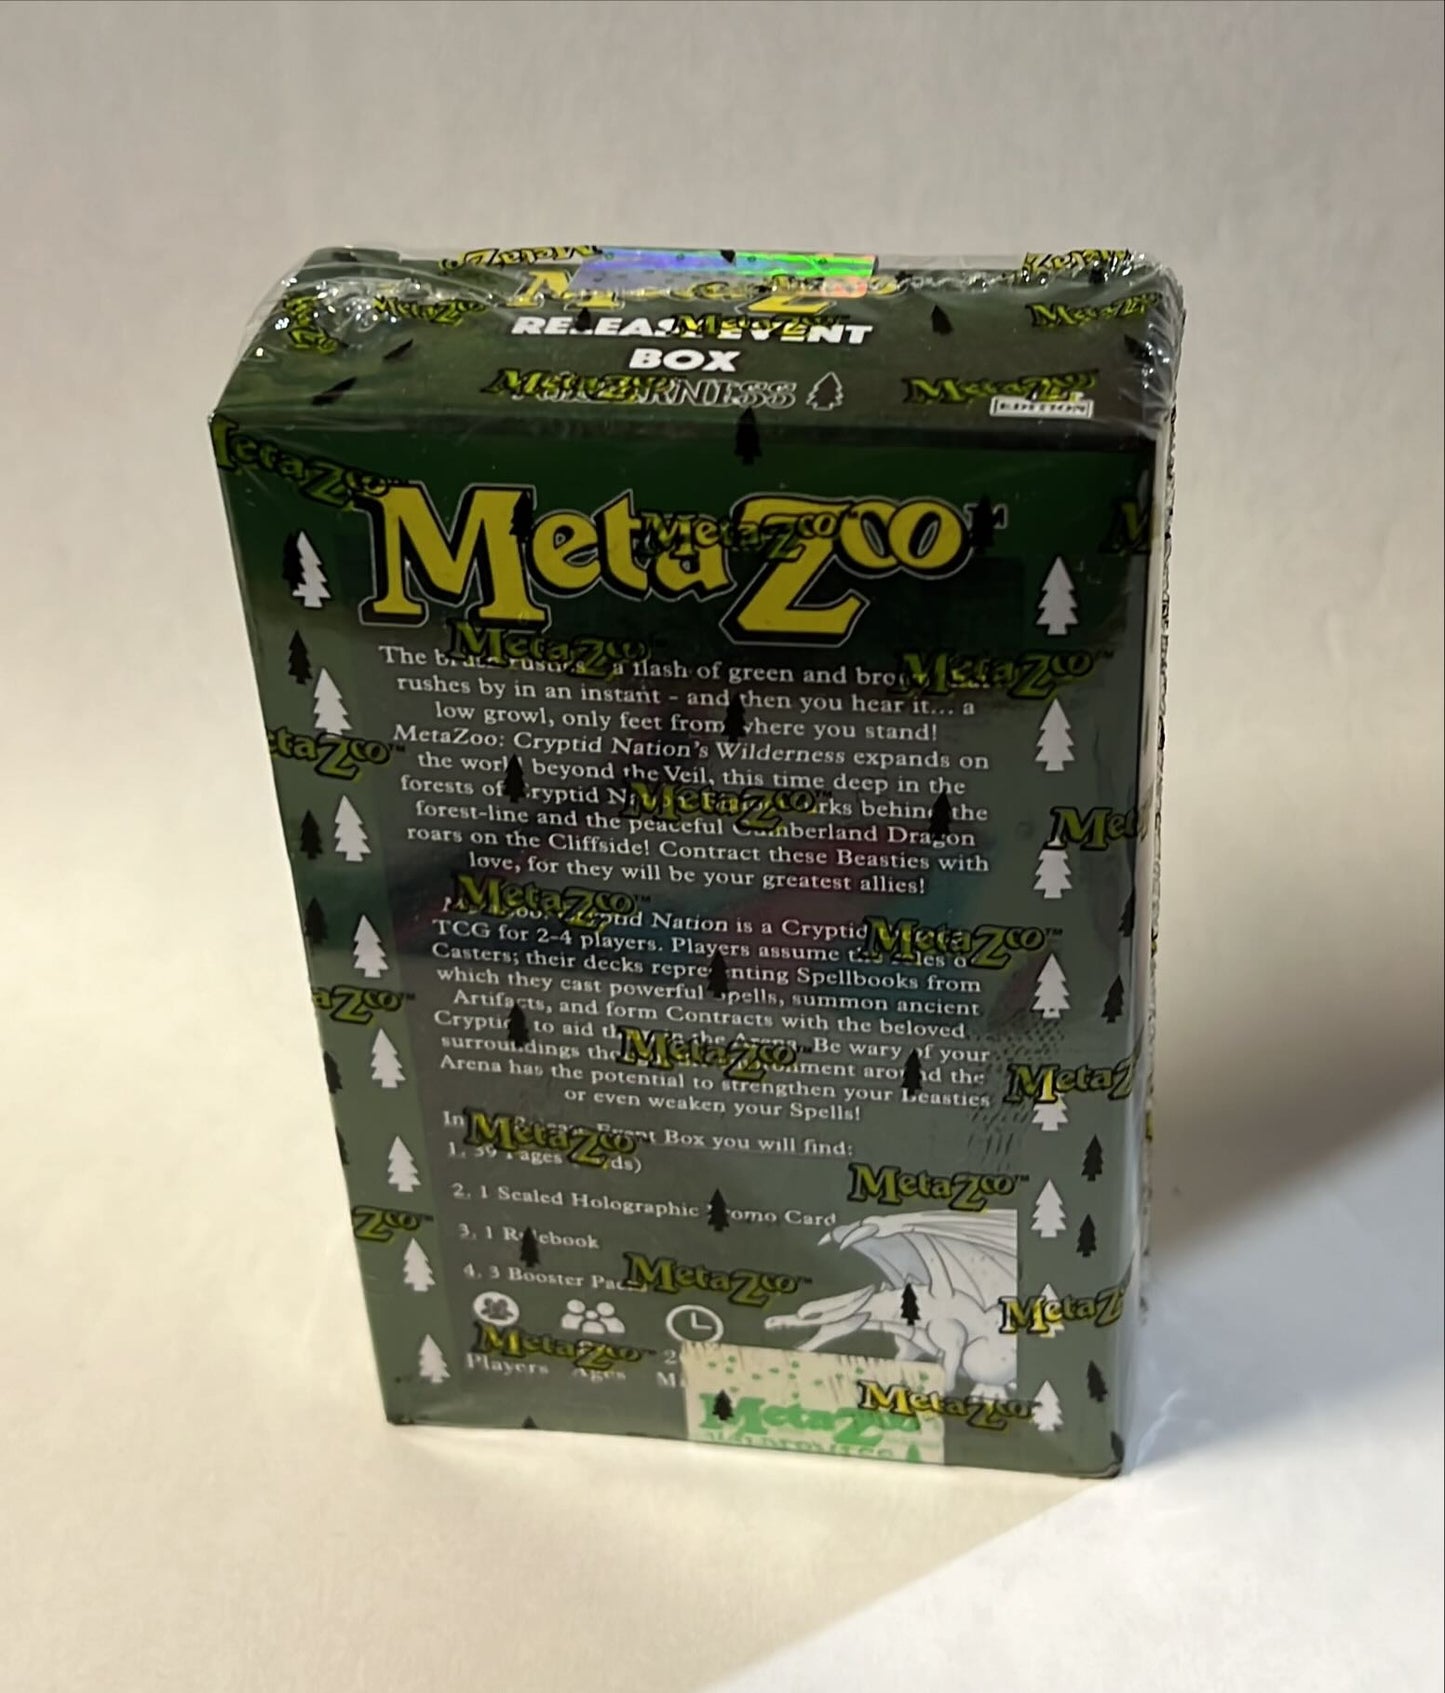 MetaZoo TCG Wilderness 1st Edition Release Event Deck